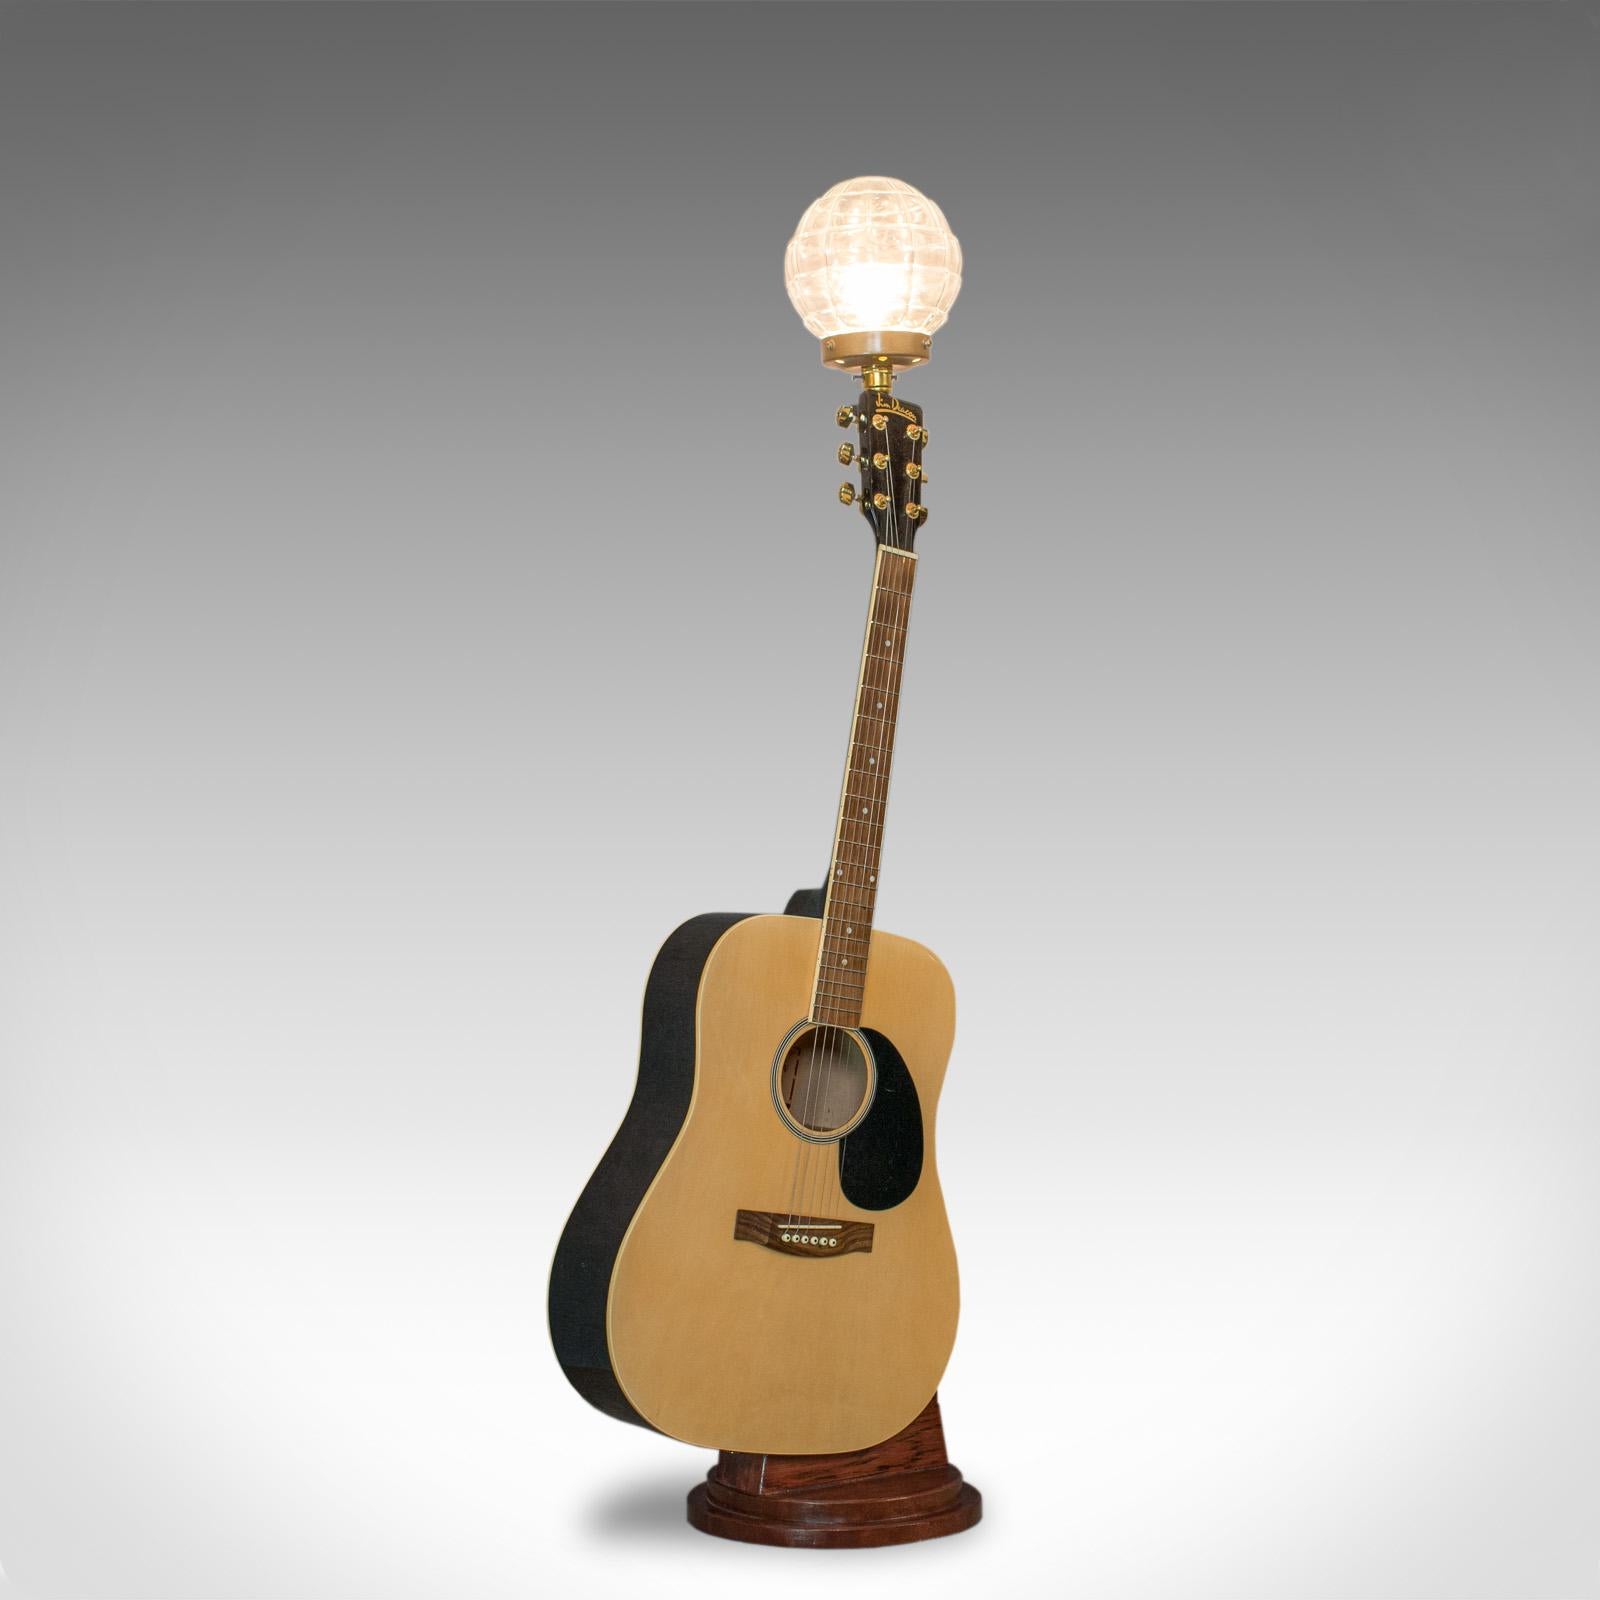 This is a vintage acoustic guitar lamp. An English, bespoke handcrafted table light with a Jim Deacon guitar body and a glass dome light fitting.

In excellent condition, fully working with quality, glass dome lamp
Classic Dreadnought acoustic